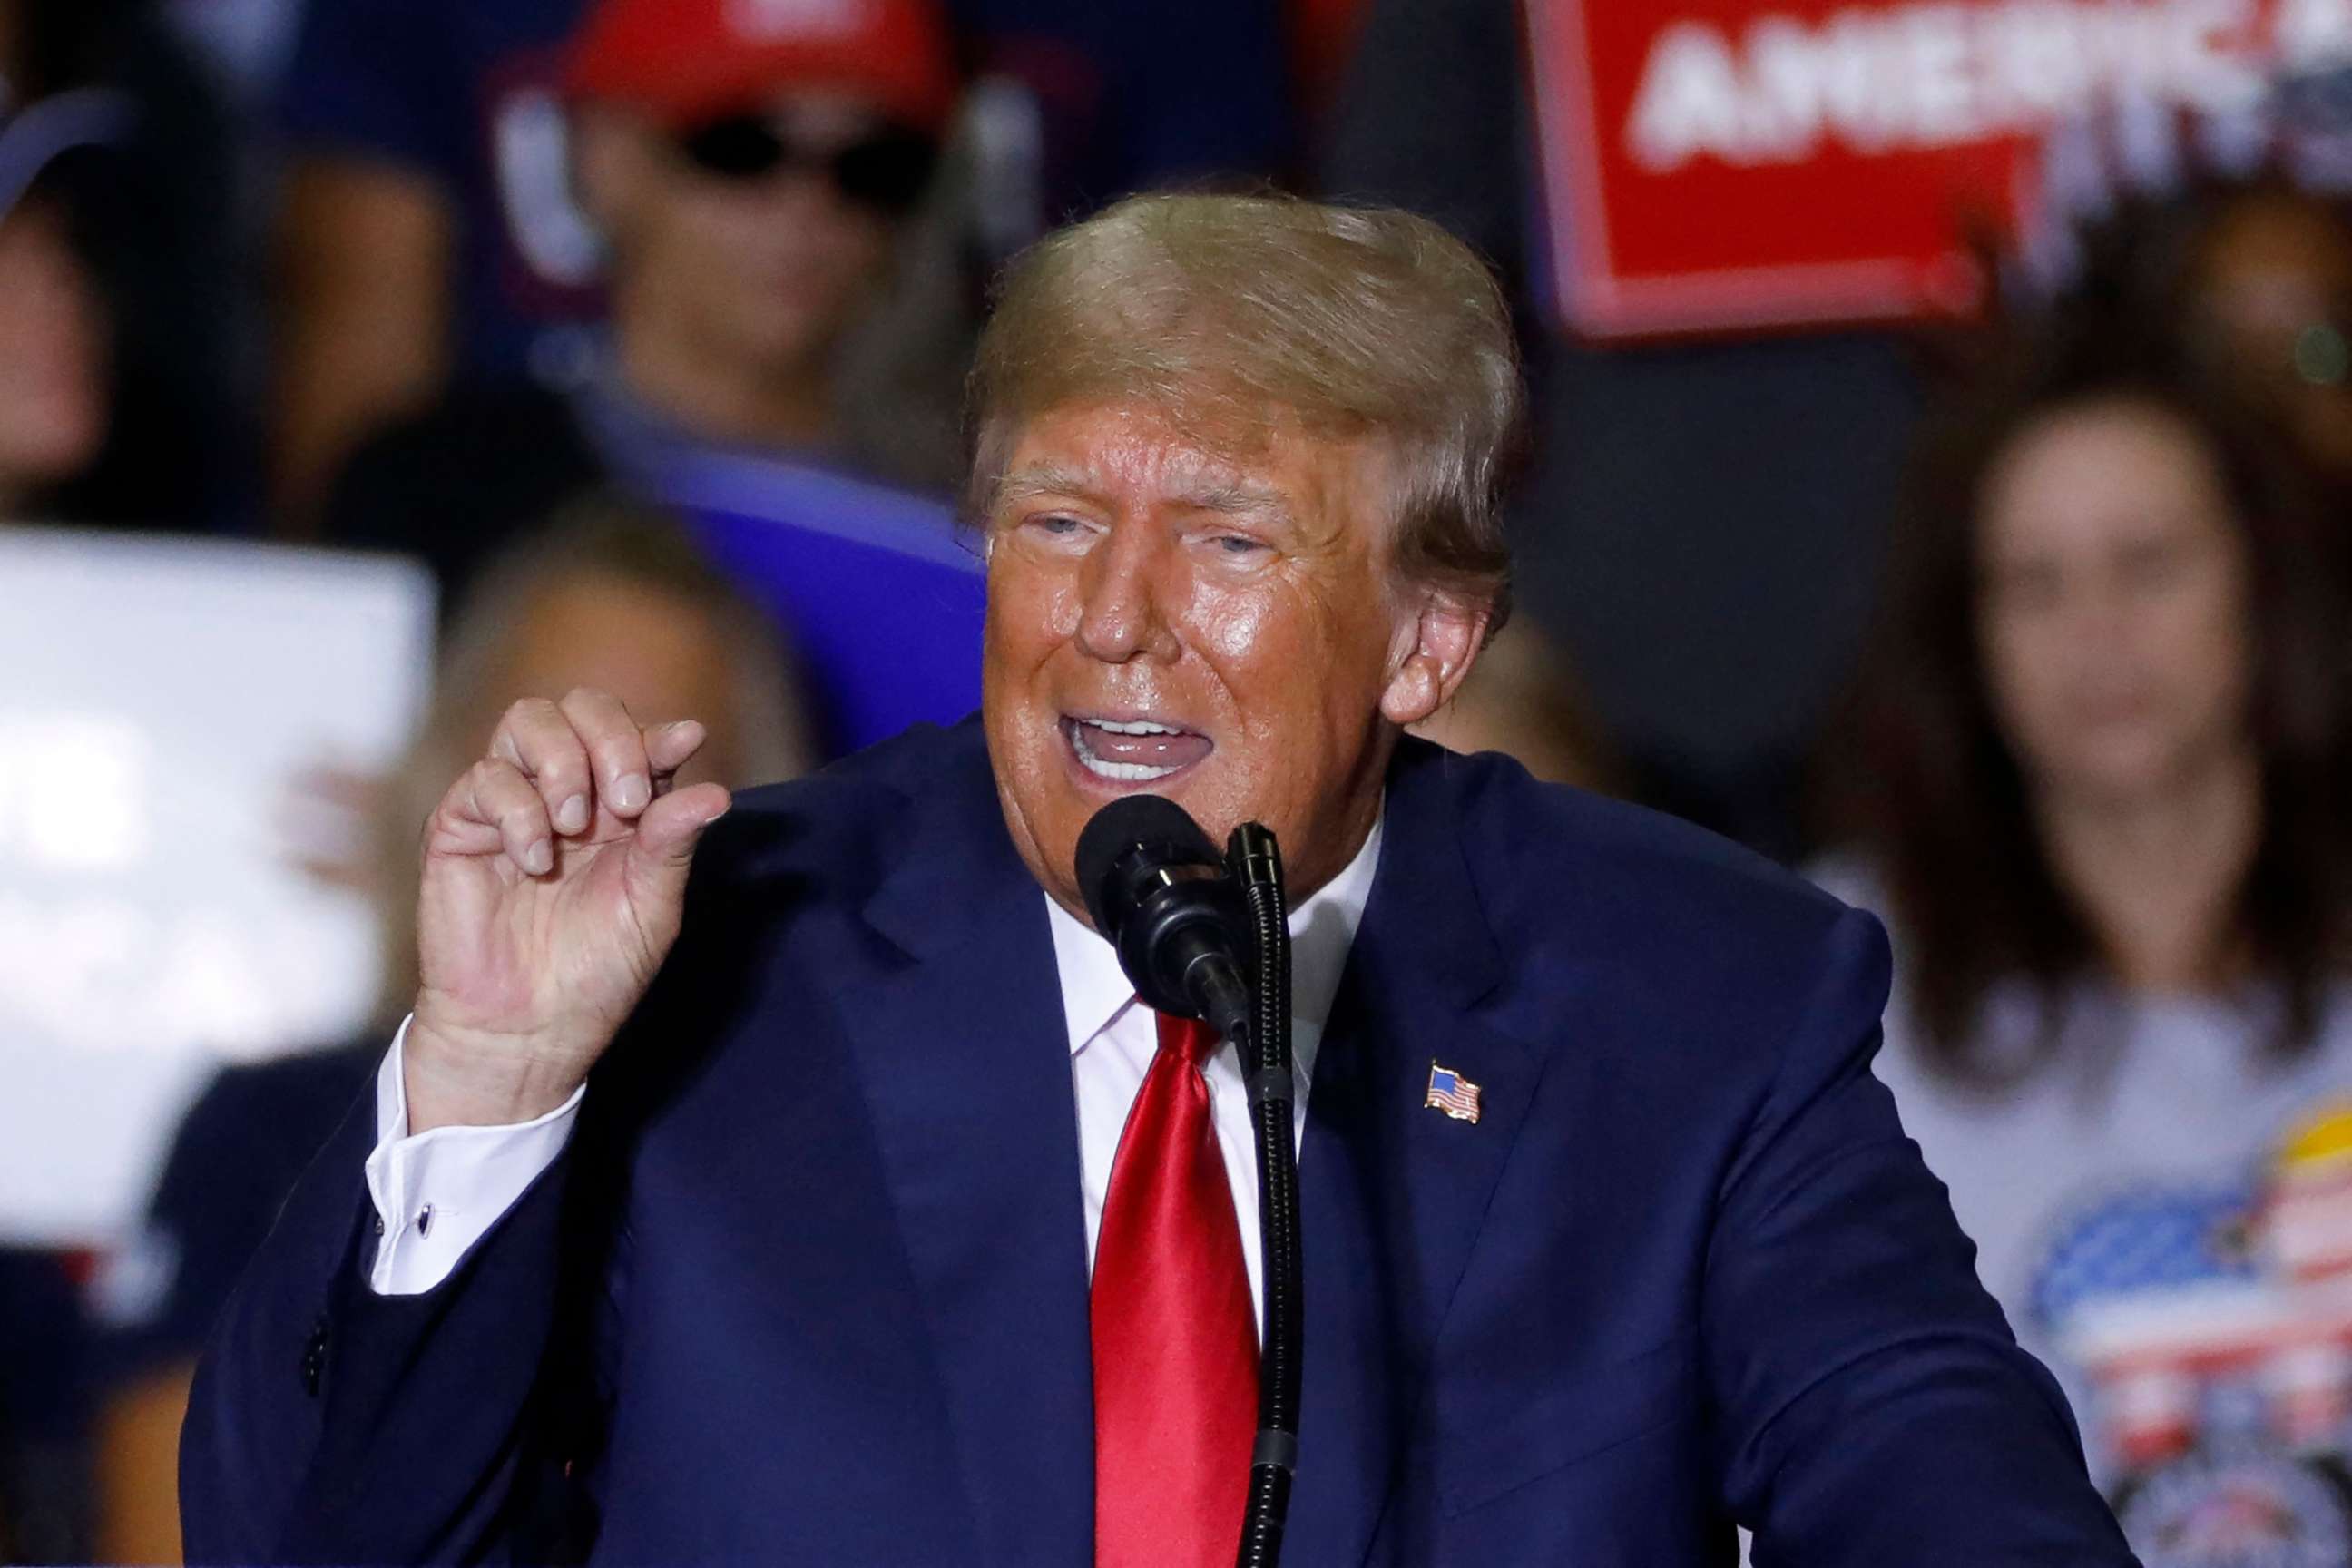 PHOTO: In this file photo taken on Oct. 1, 2022, former President Donald Trump speaks during a Save America rally at Macomb County Community College Sports and Expo Center in Warren, Mich.